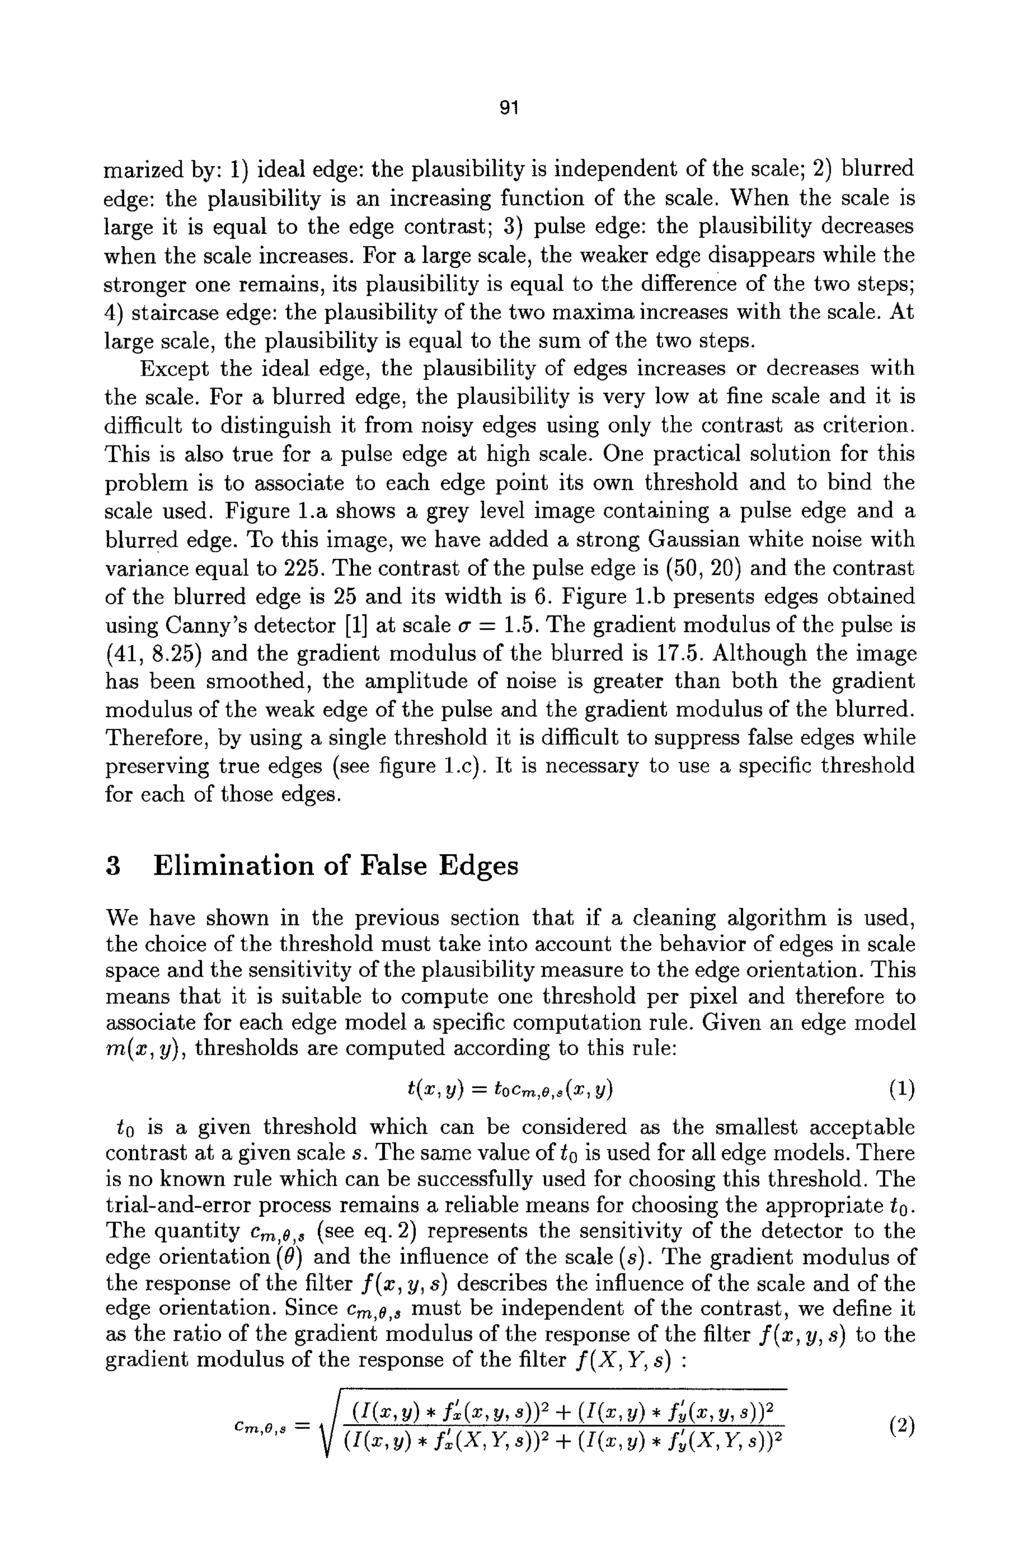 9] marized by: 1) ideal edge: the plausibility is independent of the scale; 2) blurred edge: the plausibility is an increasing function of the scale.